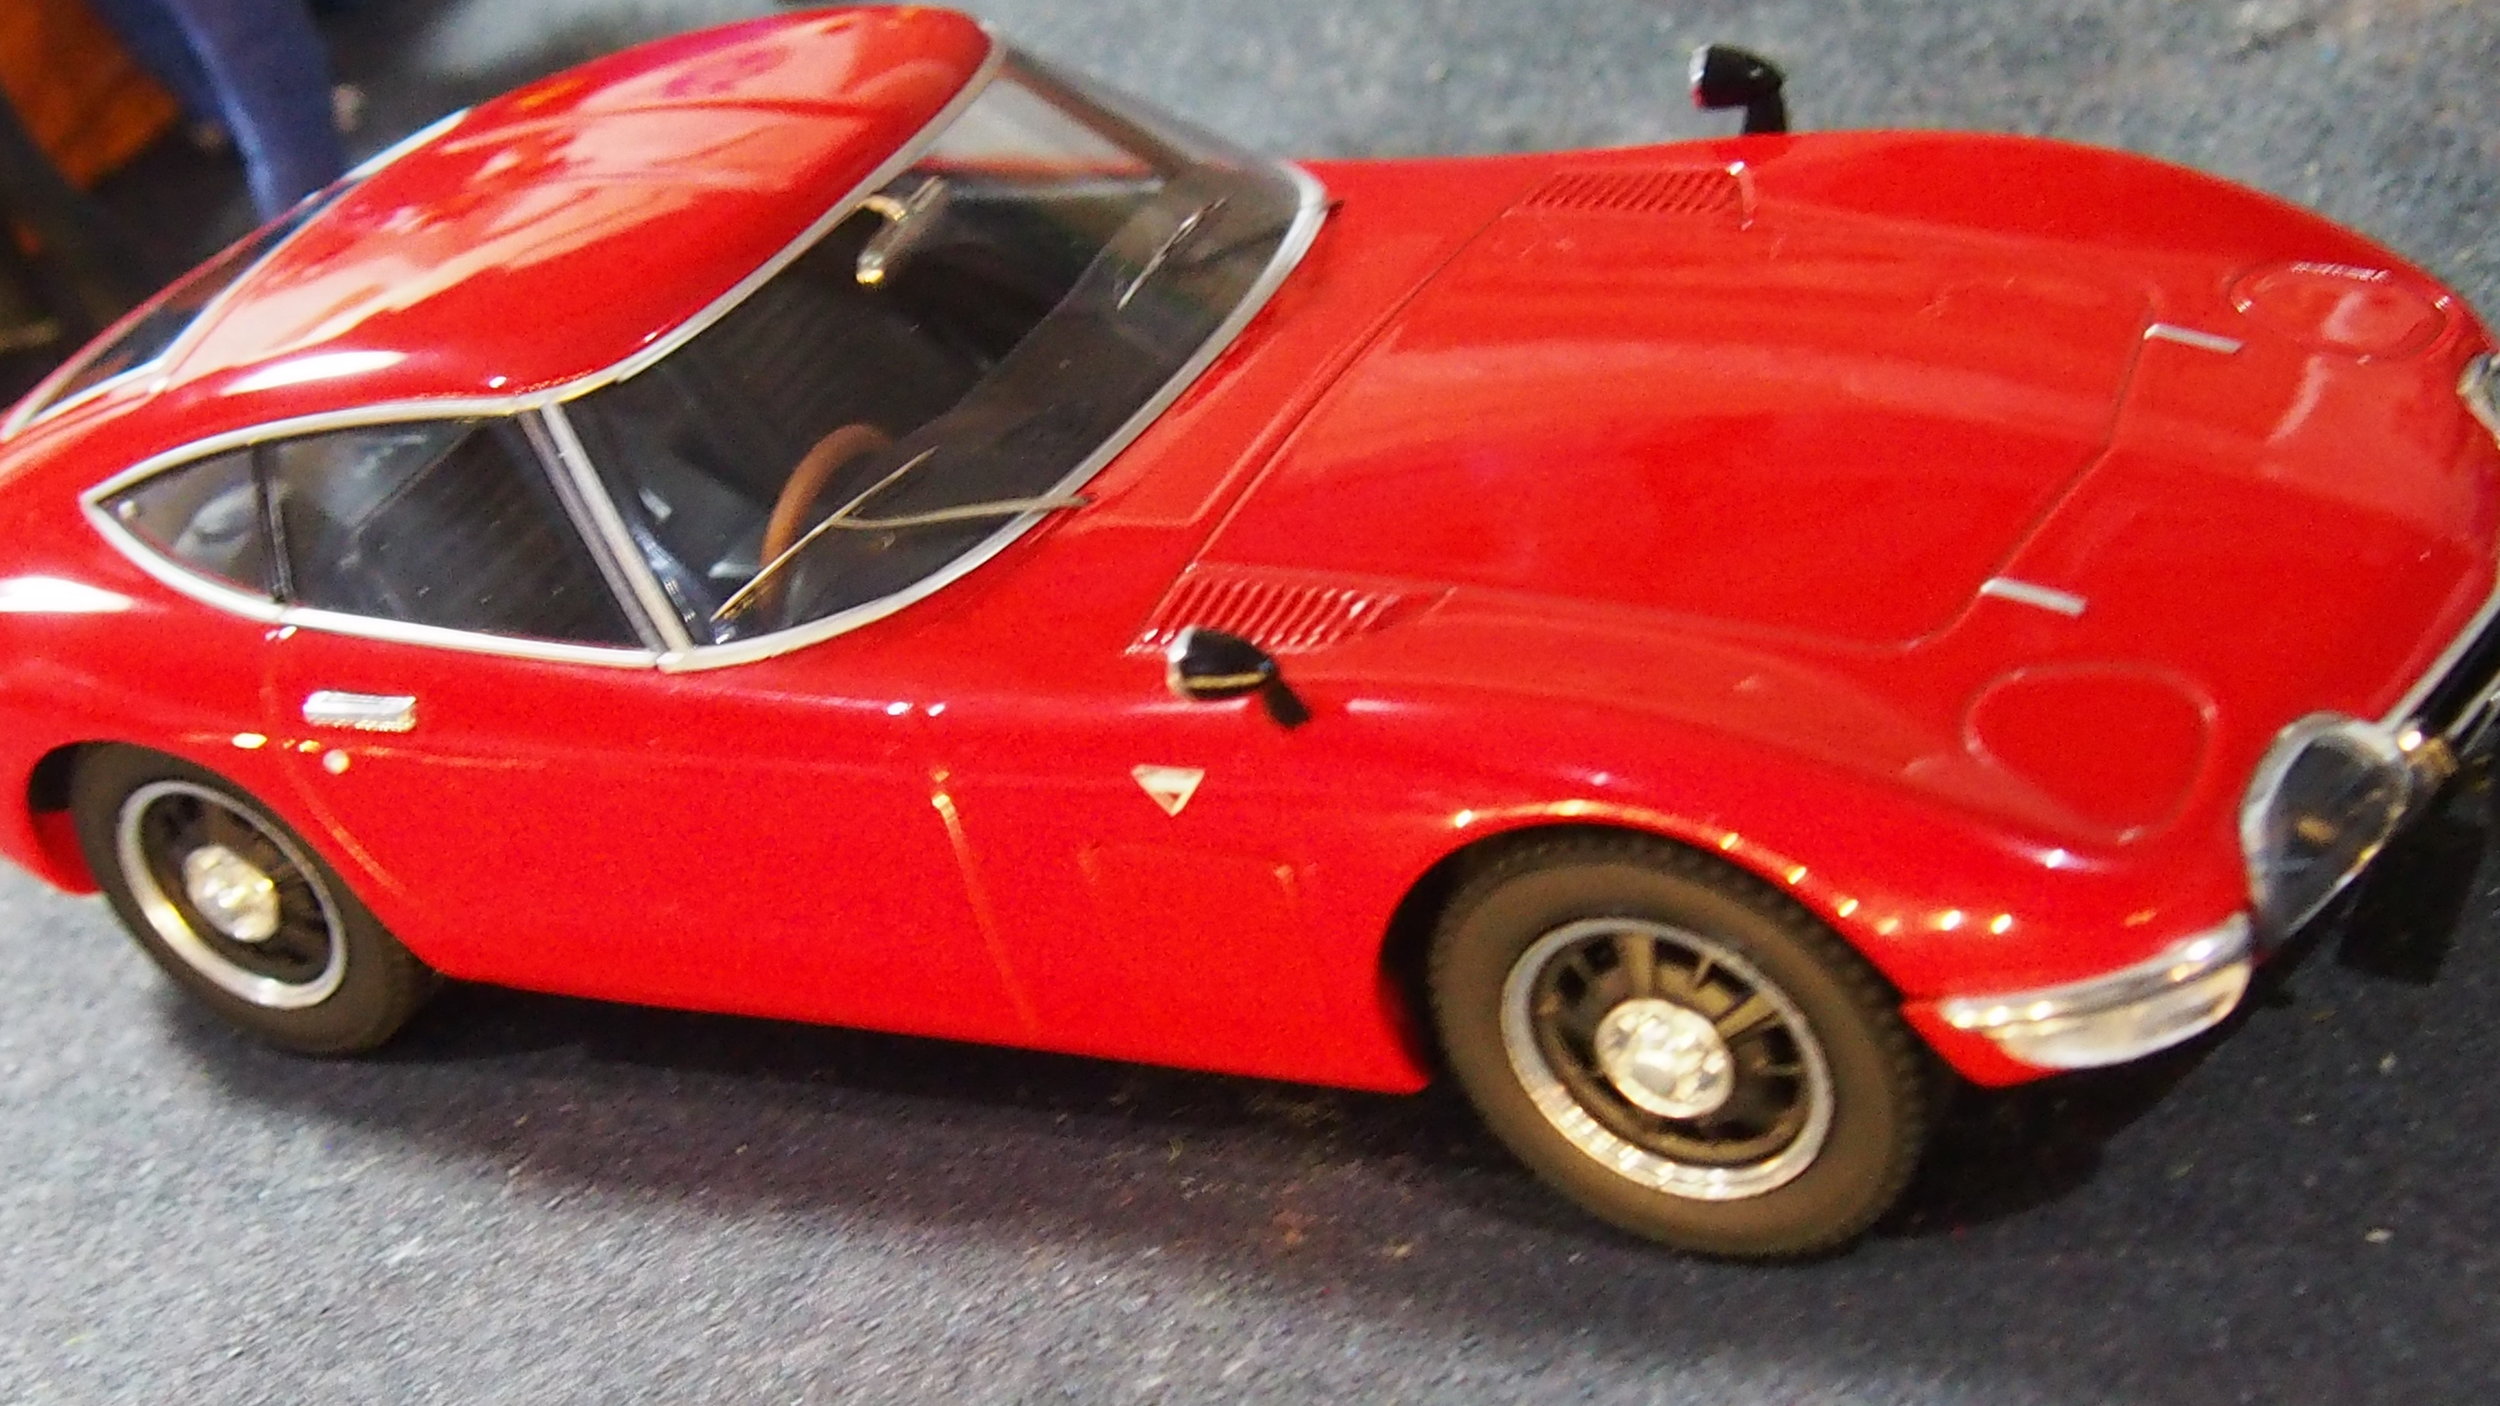 Details about   TOYOTA 2000GT diecast model road car white or red 1967 1:18 TRIPLE 9 1800183 184 